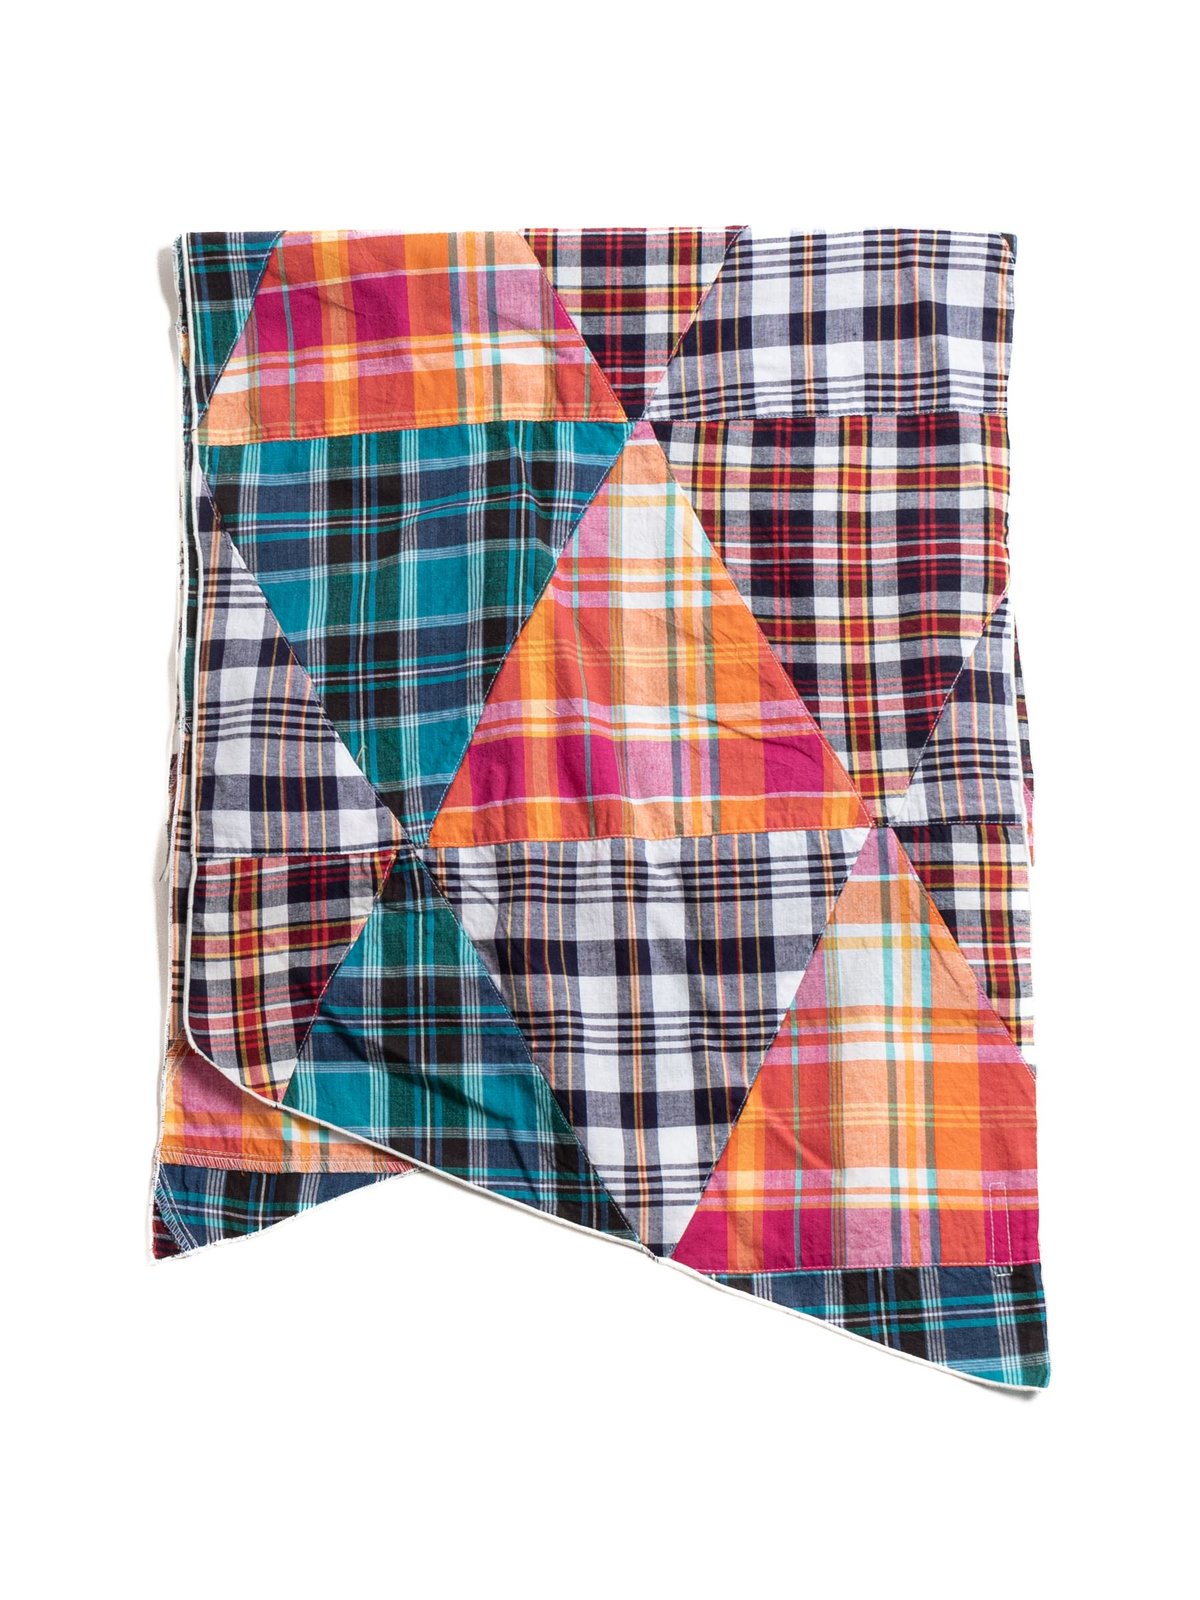 LONG SCARF MULTI COLOR PATCHWORK TRIANGLE PLAID - Image 3